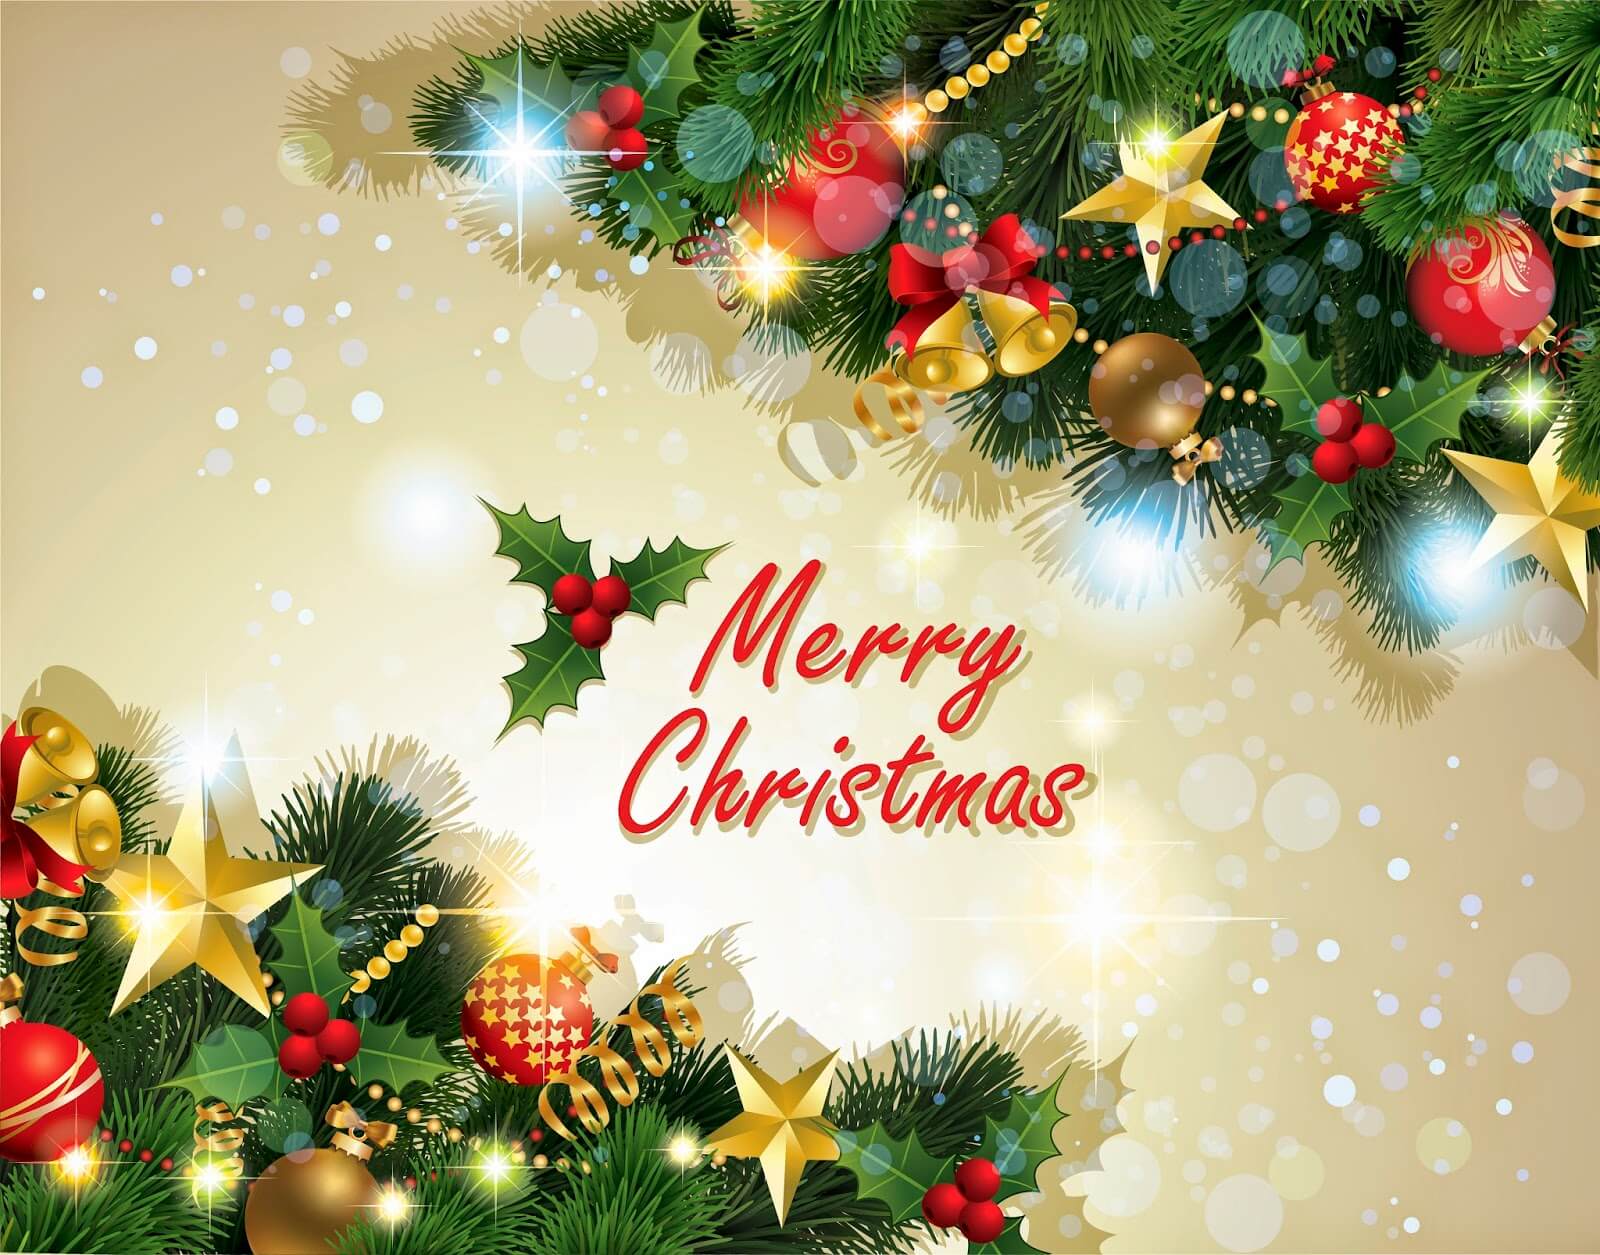 merry christmas images for loved ones